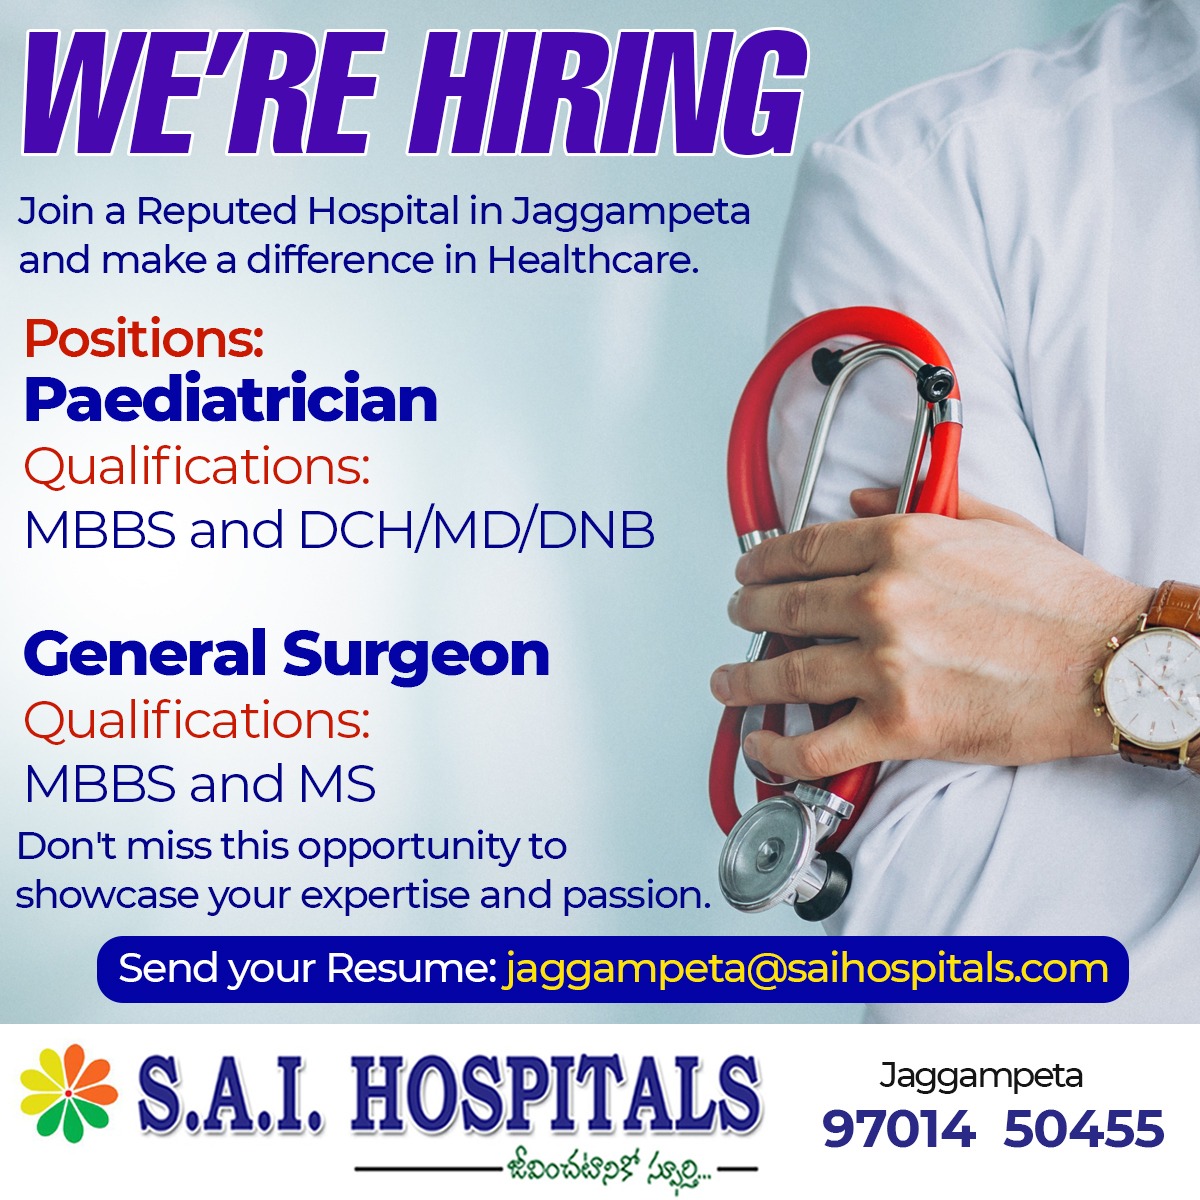 WE'RE HIRING
Join a Reputed hospital in Jaggampeta and make a difference in Healthcare.
Positions:
* Paediatrician (MBBS and DCH/MD/DNB)
* General Surgeon (MBBS and MS)
Send your Resume to jaggampeta@saihospitals.com
#saihospitals #hiring #paediatrician #generalsurgeon #joinus